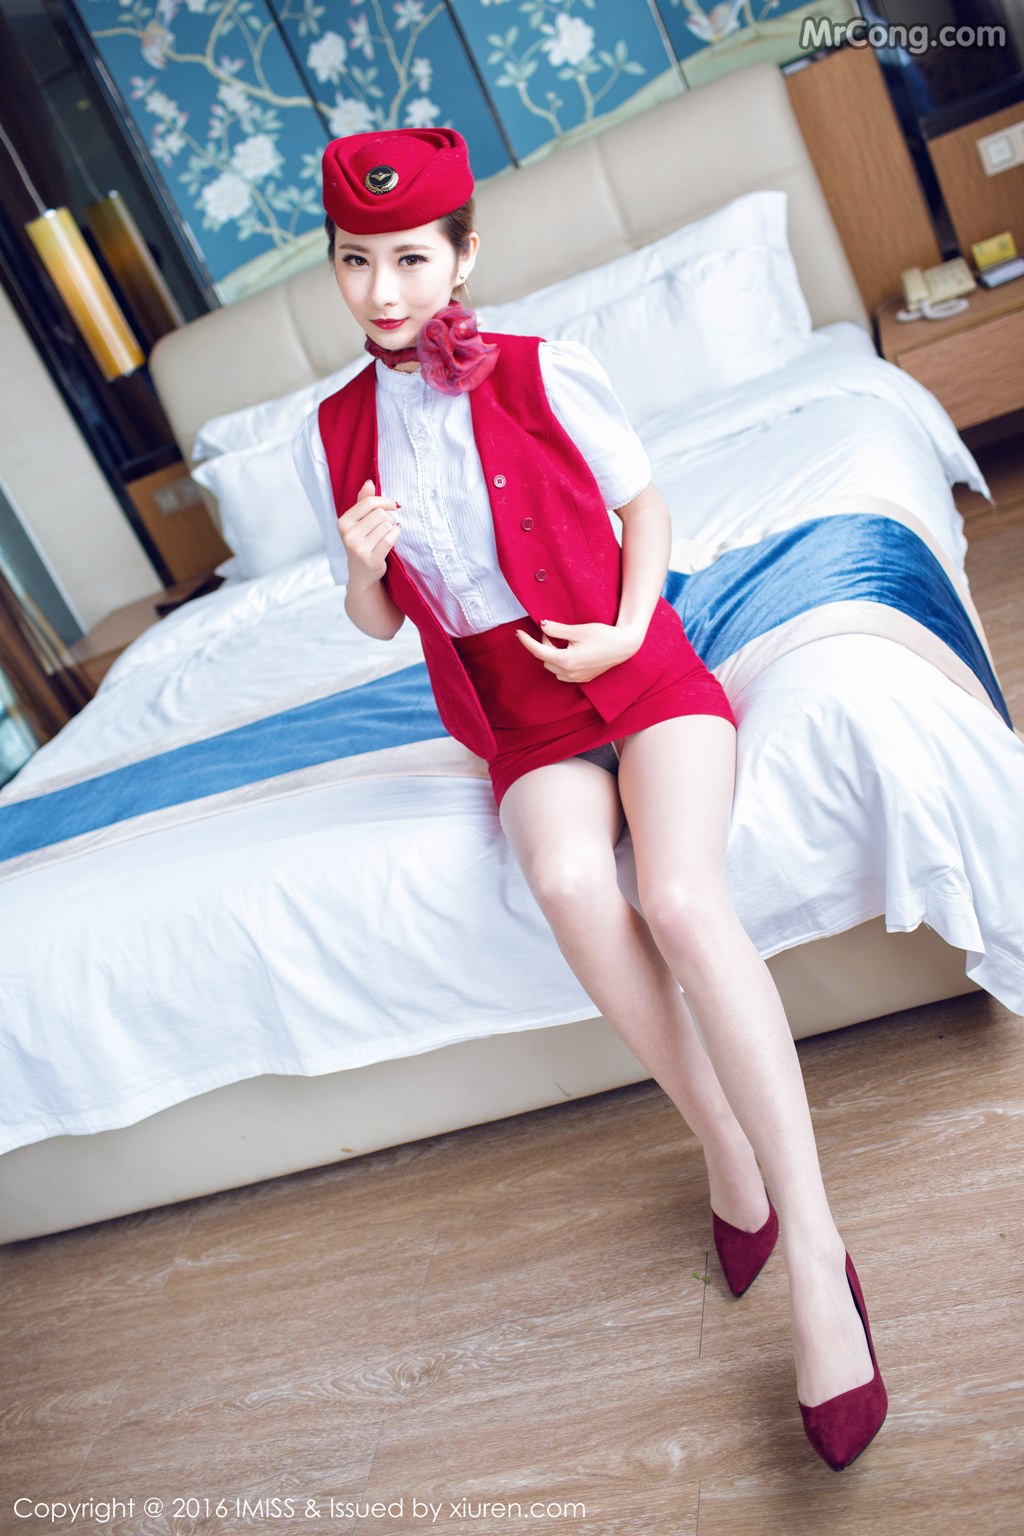 IMISS Vol.082: Lily Model (莉莉) (51 pictures) photo 1-13